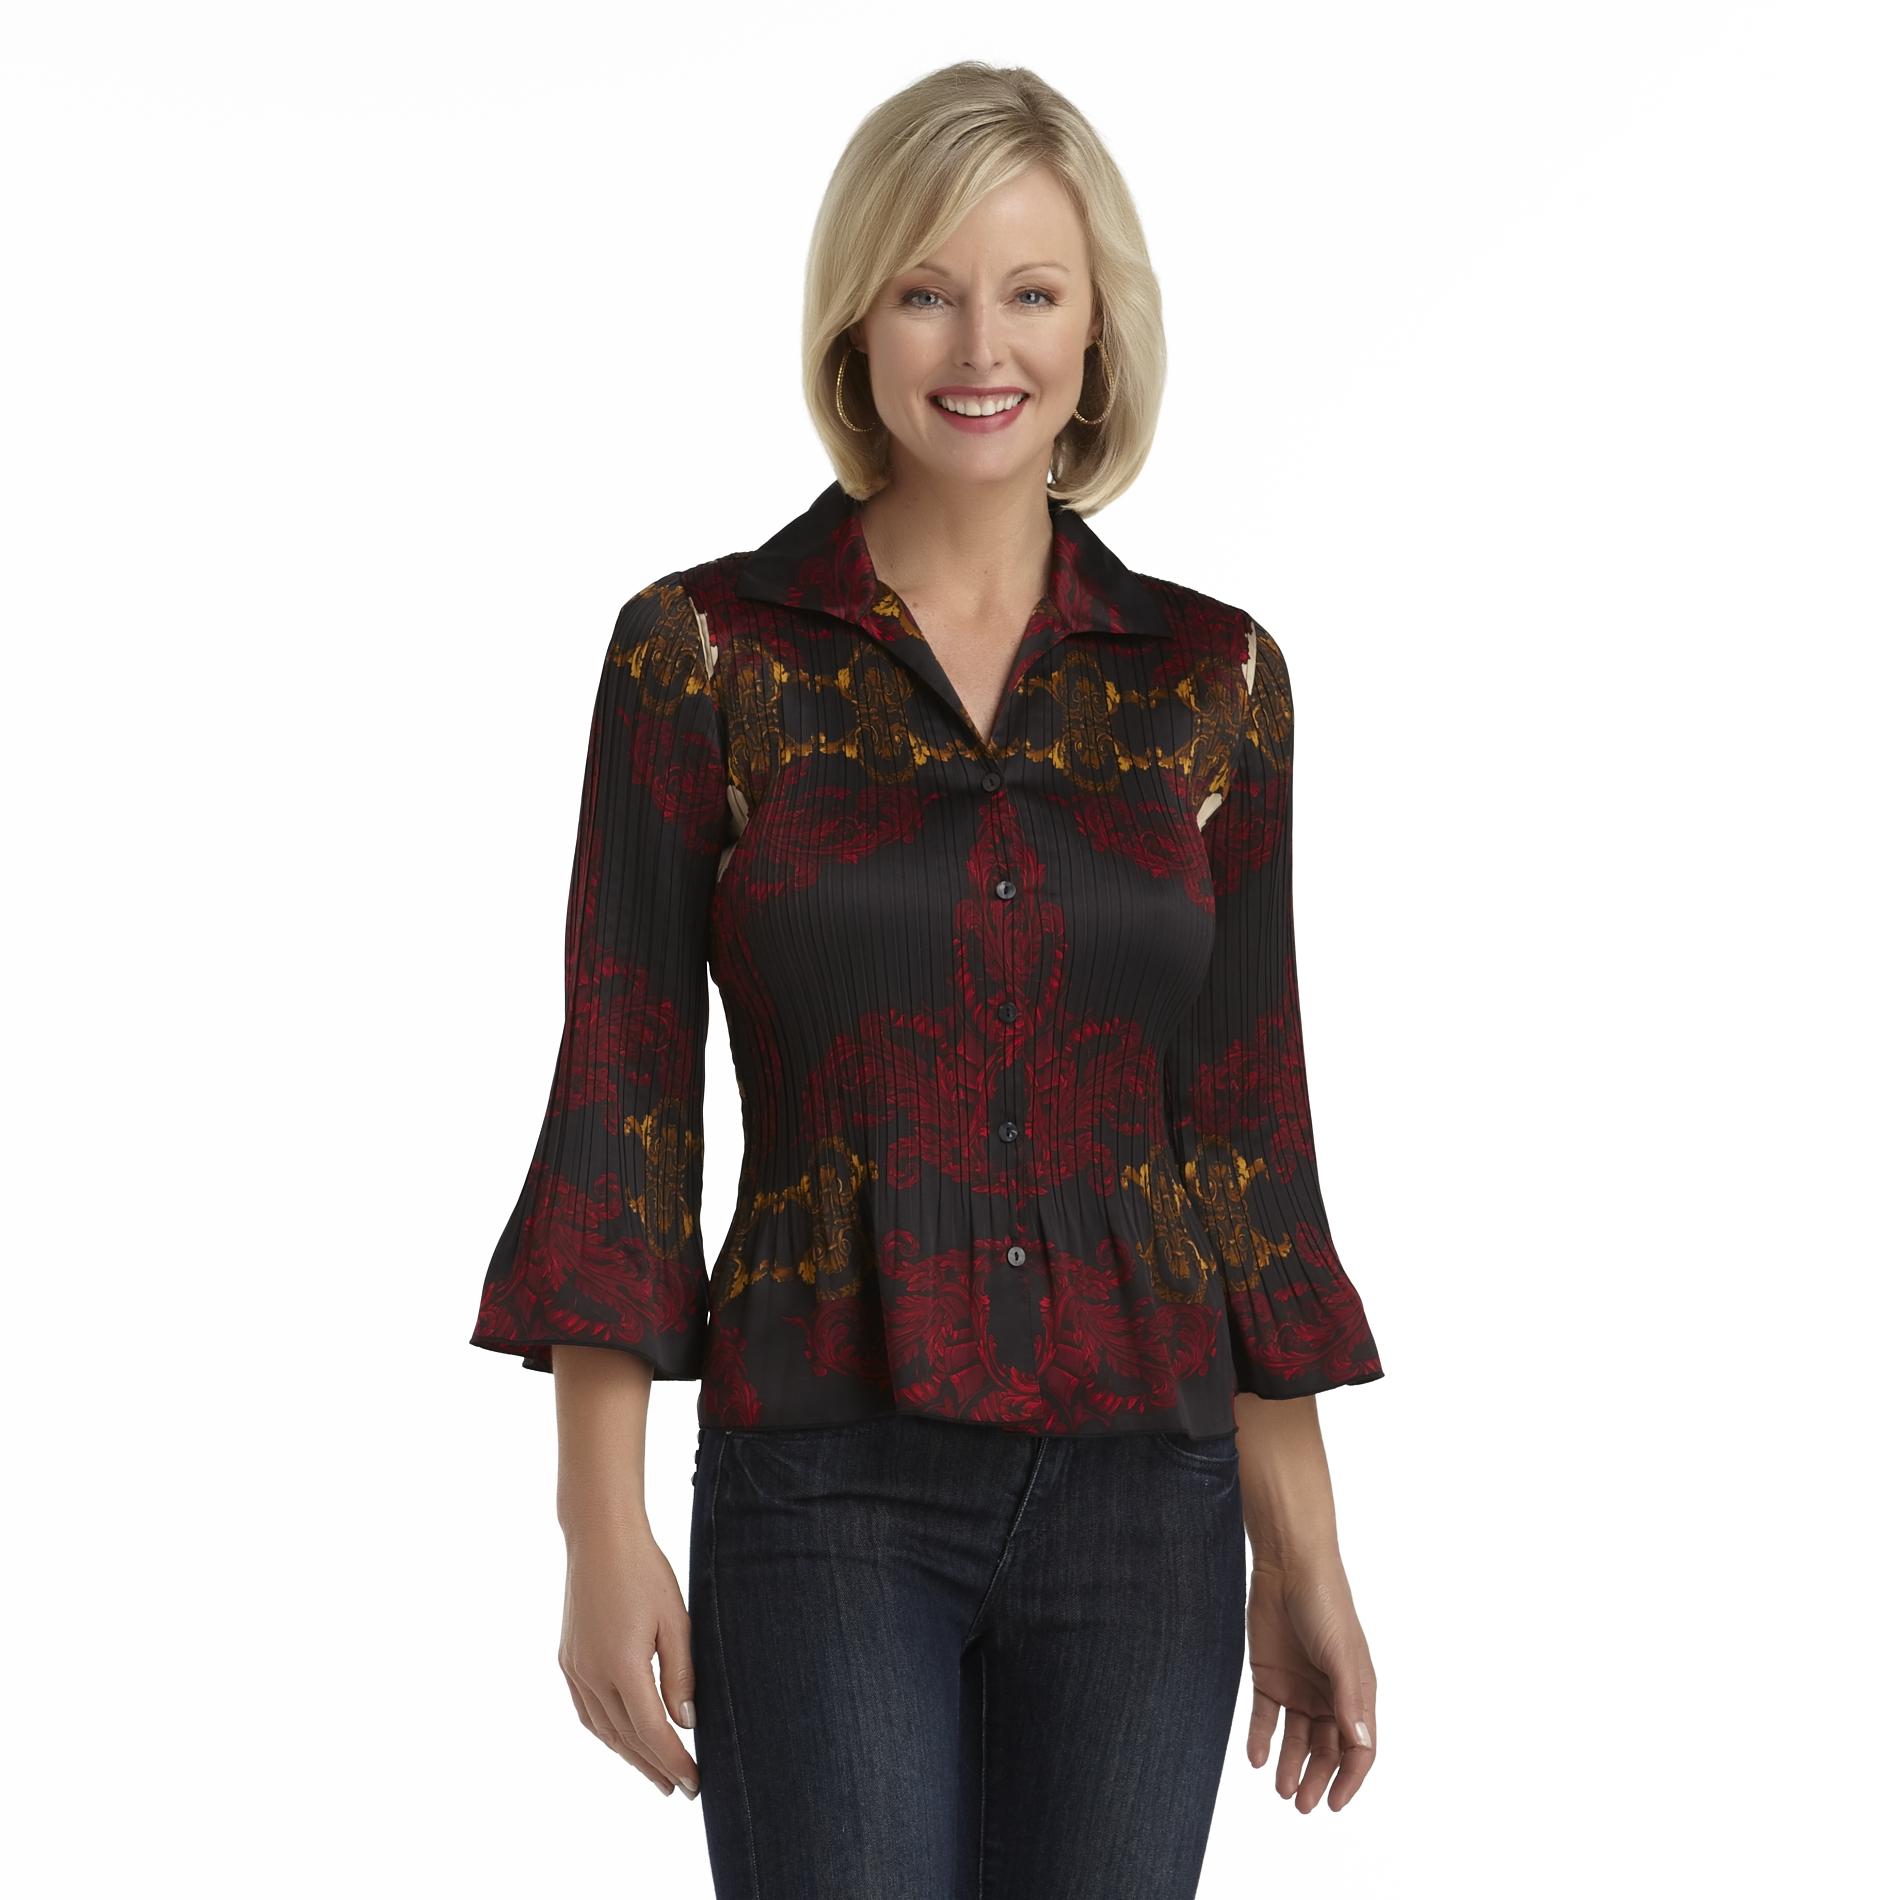 Jaclyn Smith Women's Accordion Pleat Top - Floral